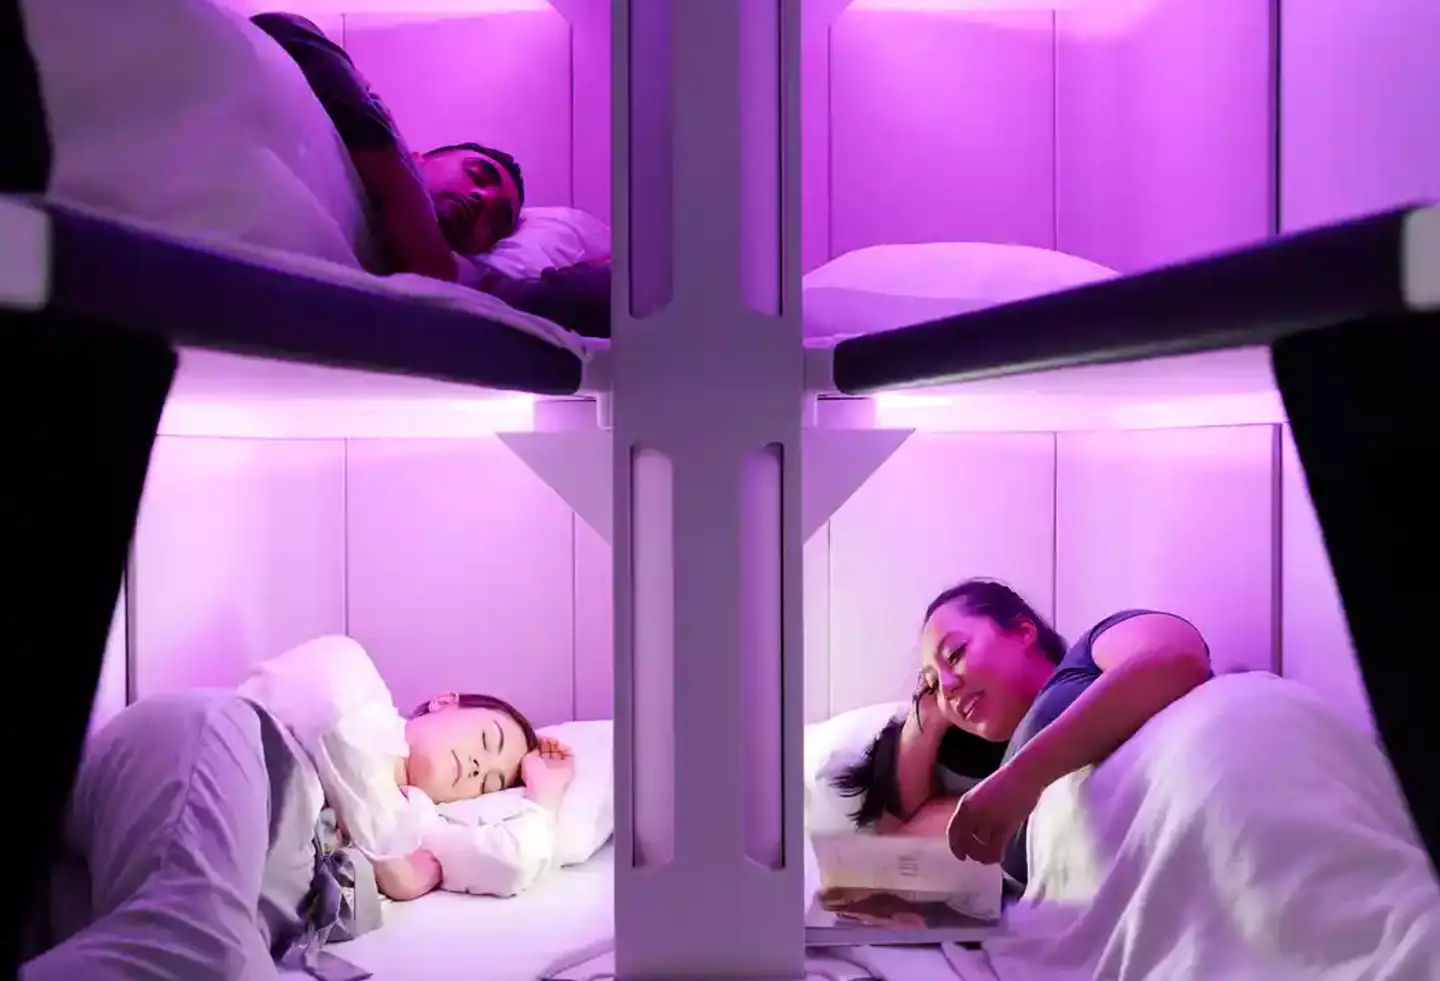 Air New Zealand is introducing bunk bed-style sleeping pods that can be used by economy passengers.